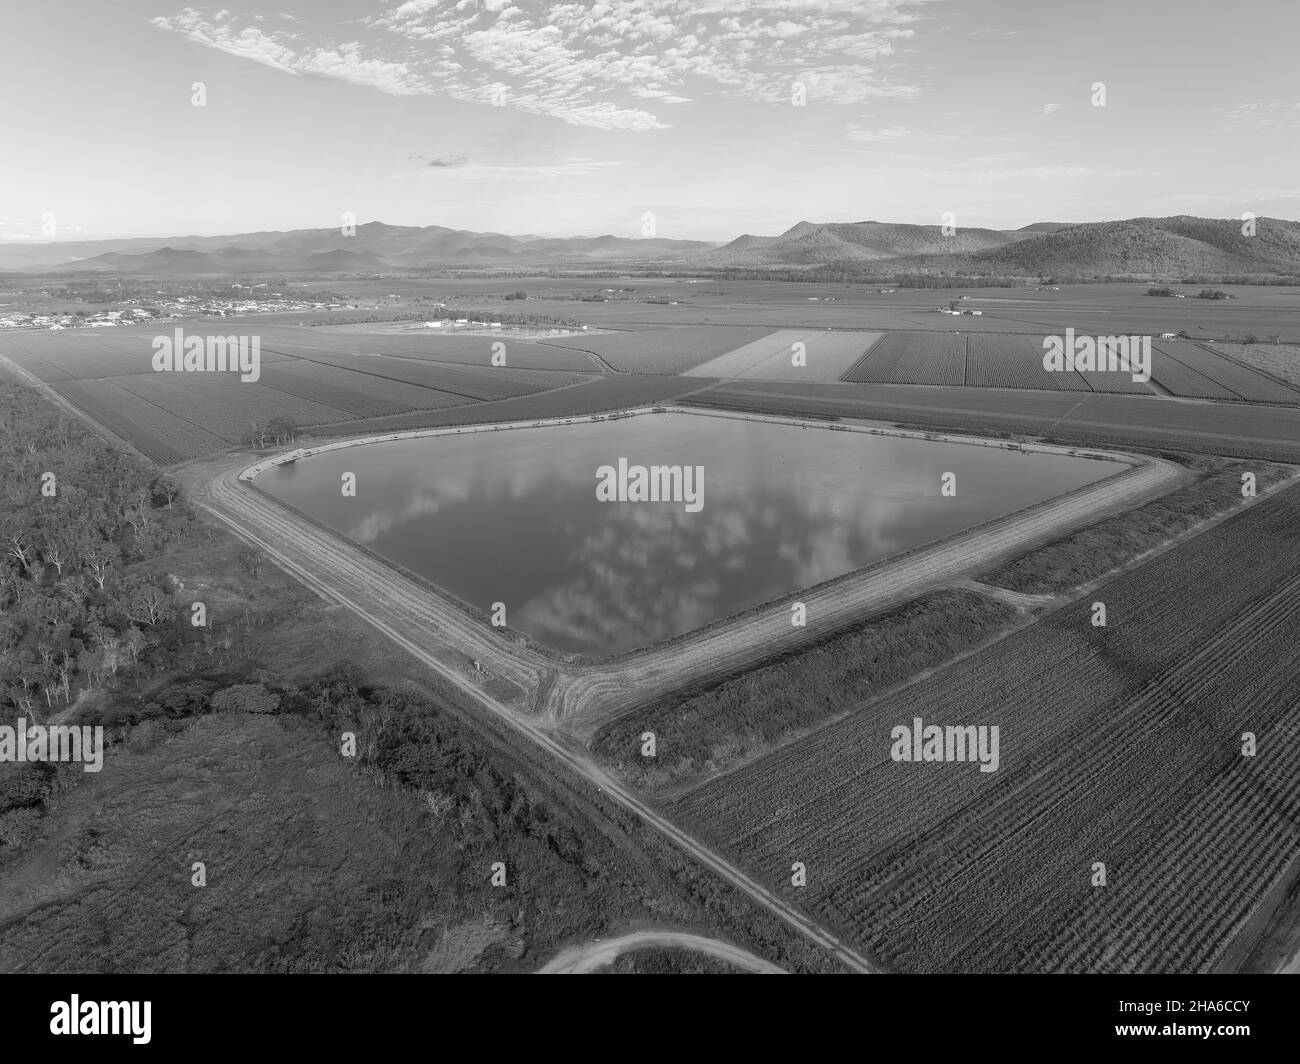 Monotone of a square shaped rural dam amongst sugarcane fields with a township in the distance Stock Photo